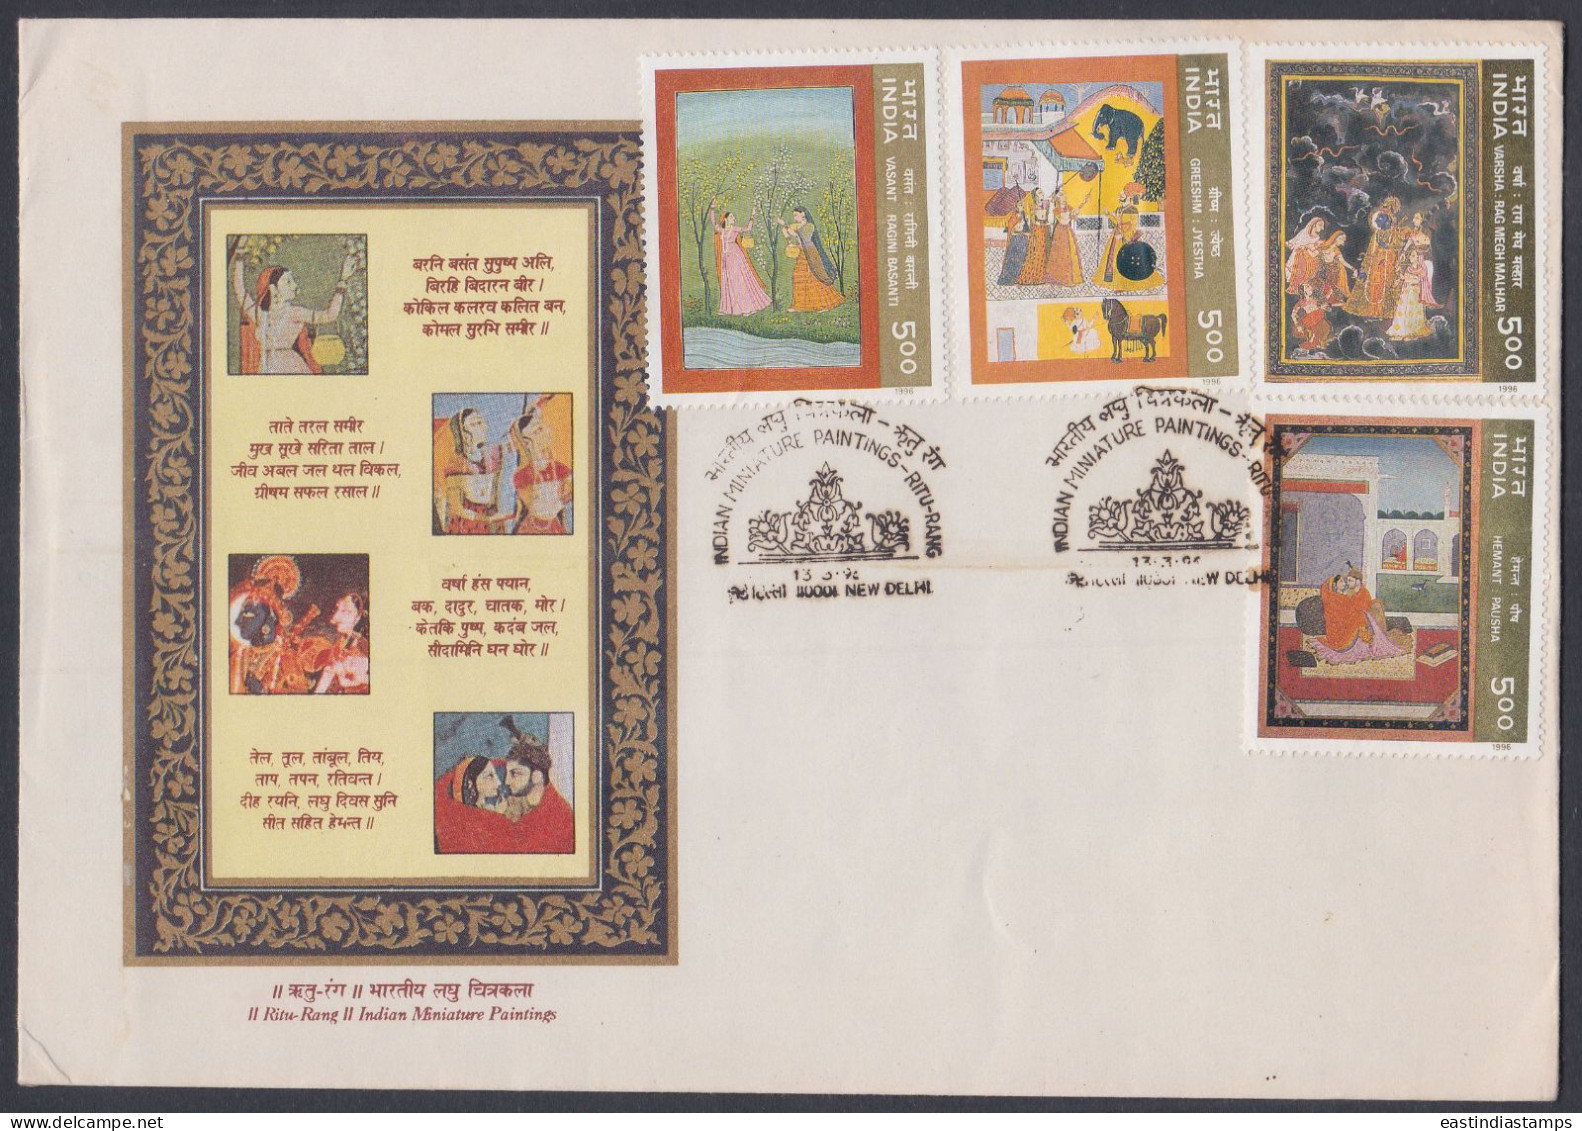 Inde India 1996 FDC Indian Miniature Paintings, Painting, Art, Arts, Painter, Horse, Royalty, Elephant, First Day Cover - Covers & Documents